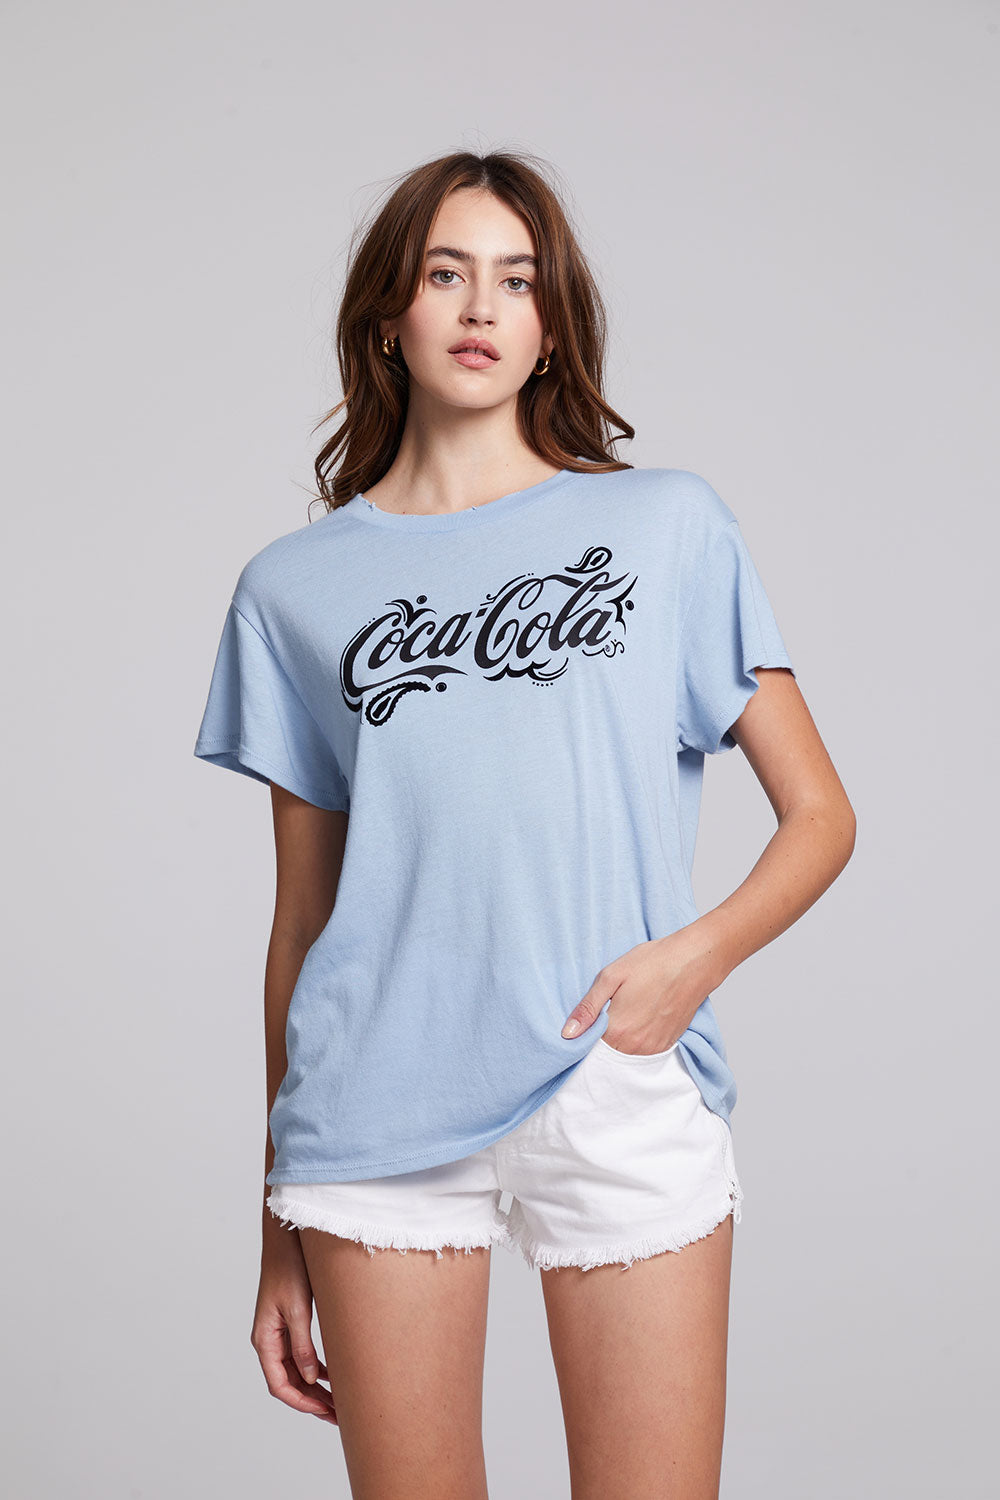 Coca-Cola Paisley Crew Neck Tee WOMENS chaserbrand